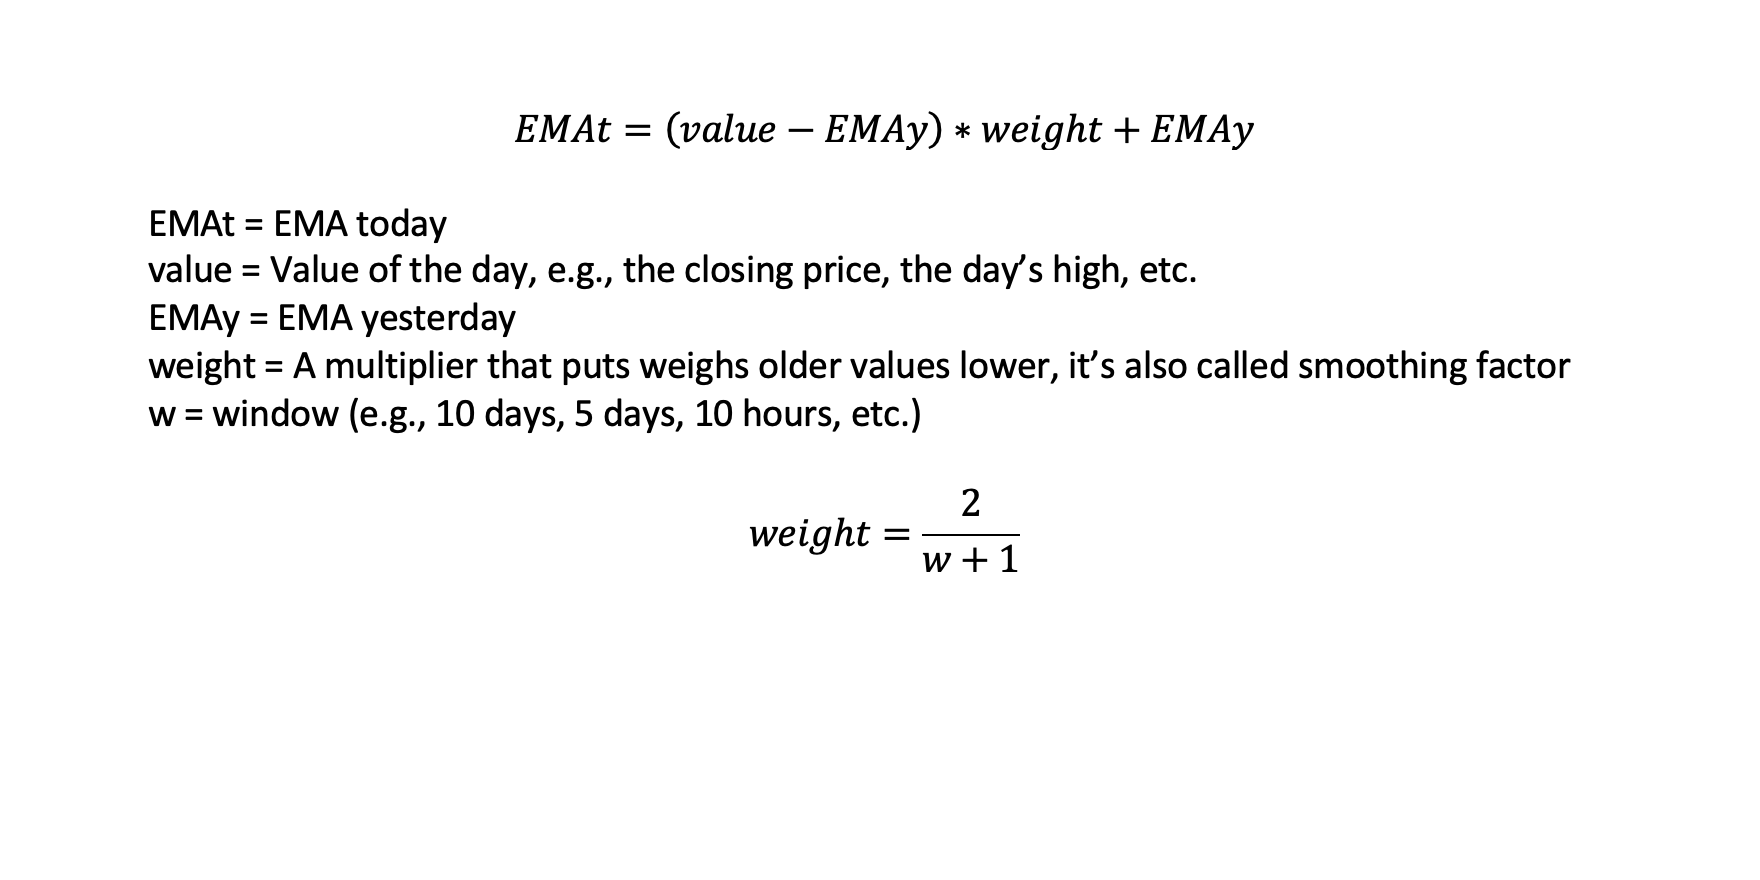 The formula for the EMA is EMAt = (value - EMAy) * weight + EMAy